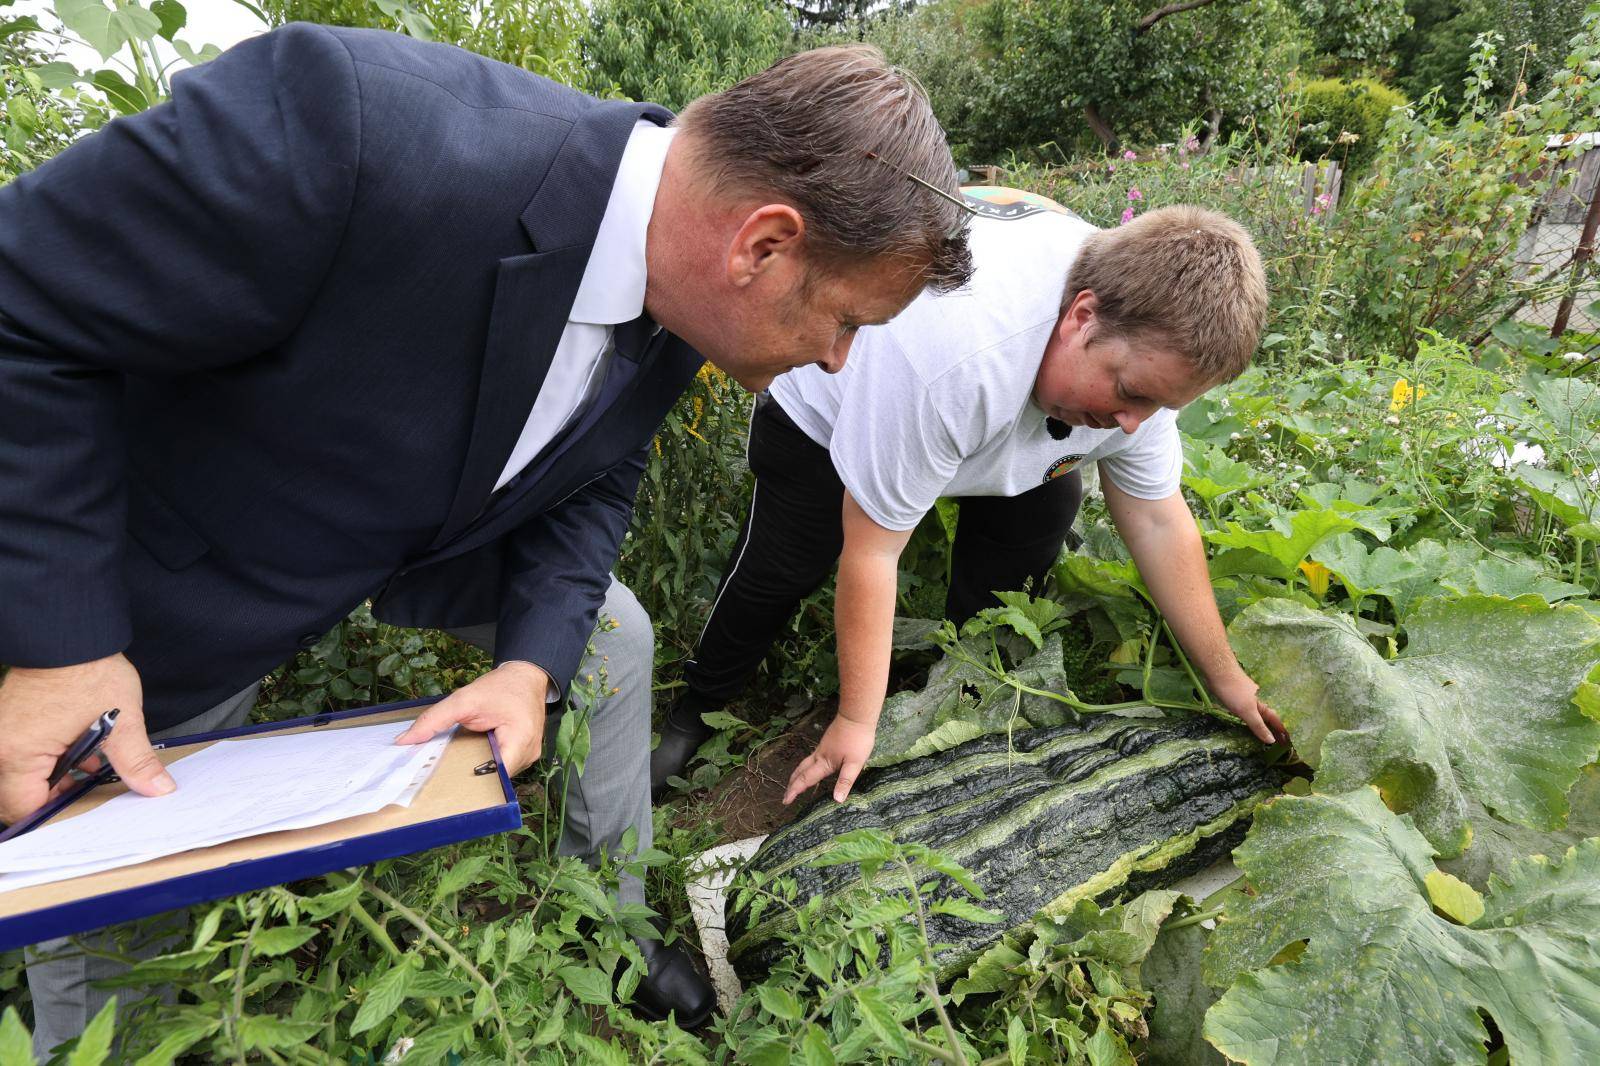 On record hunt with XXL vegetables